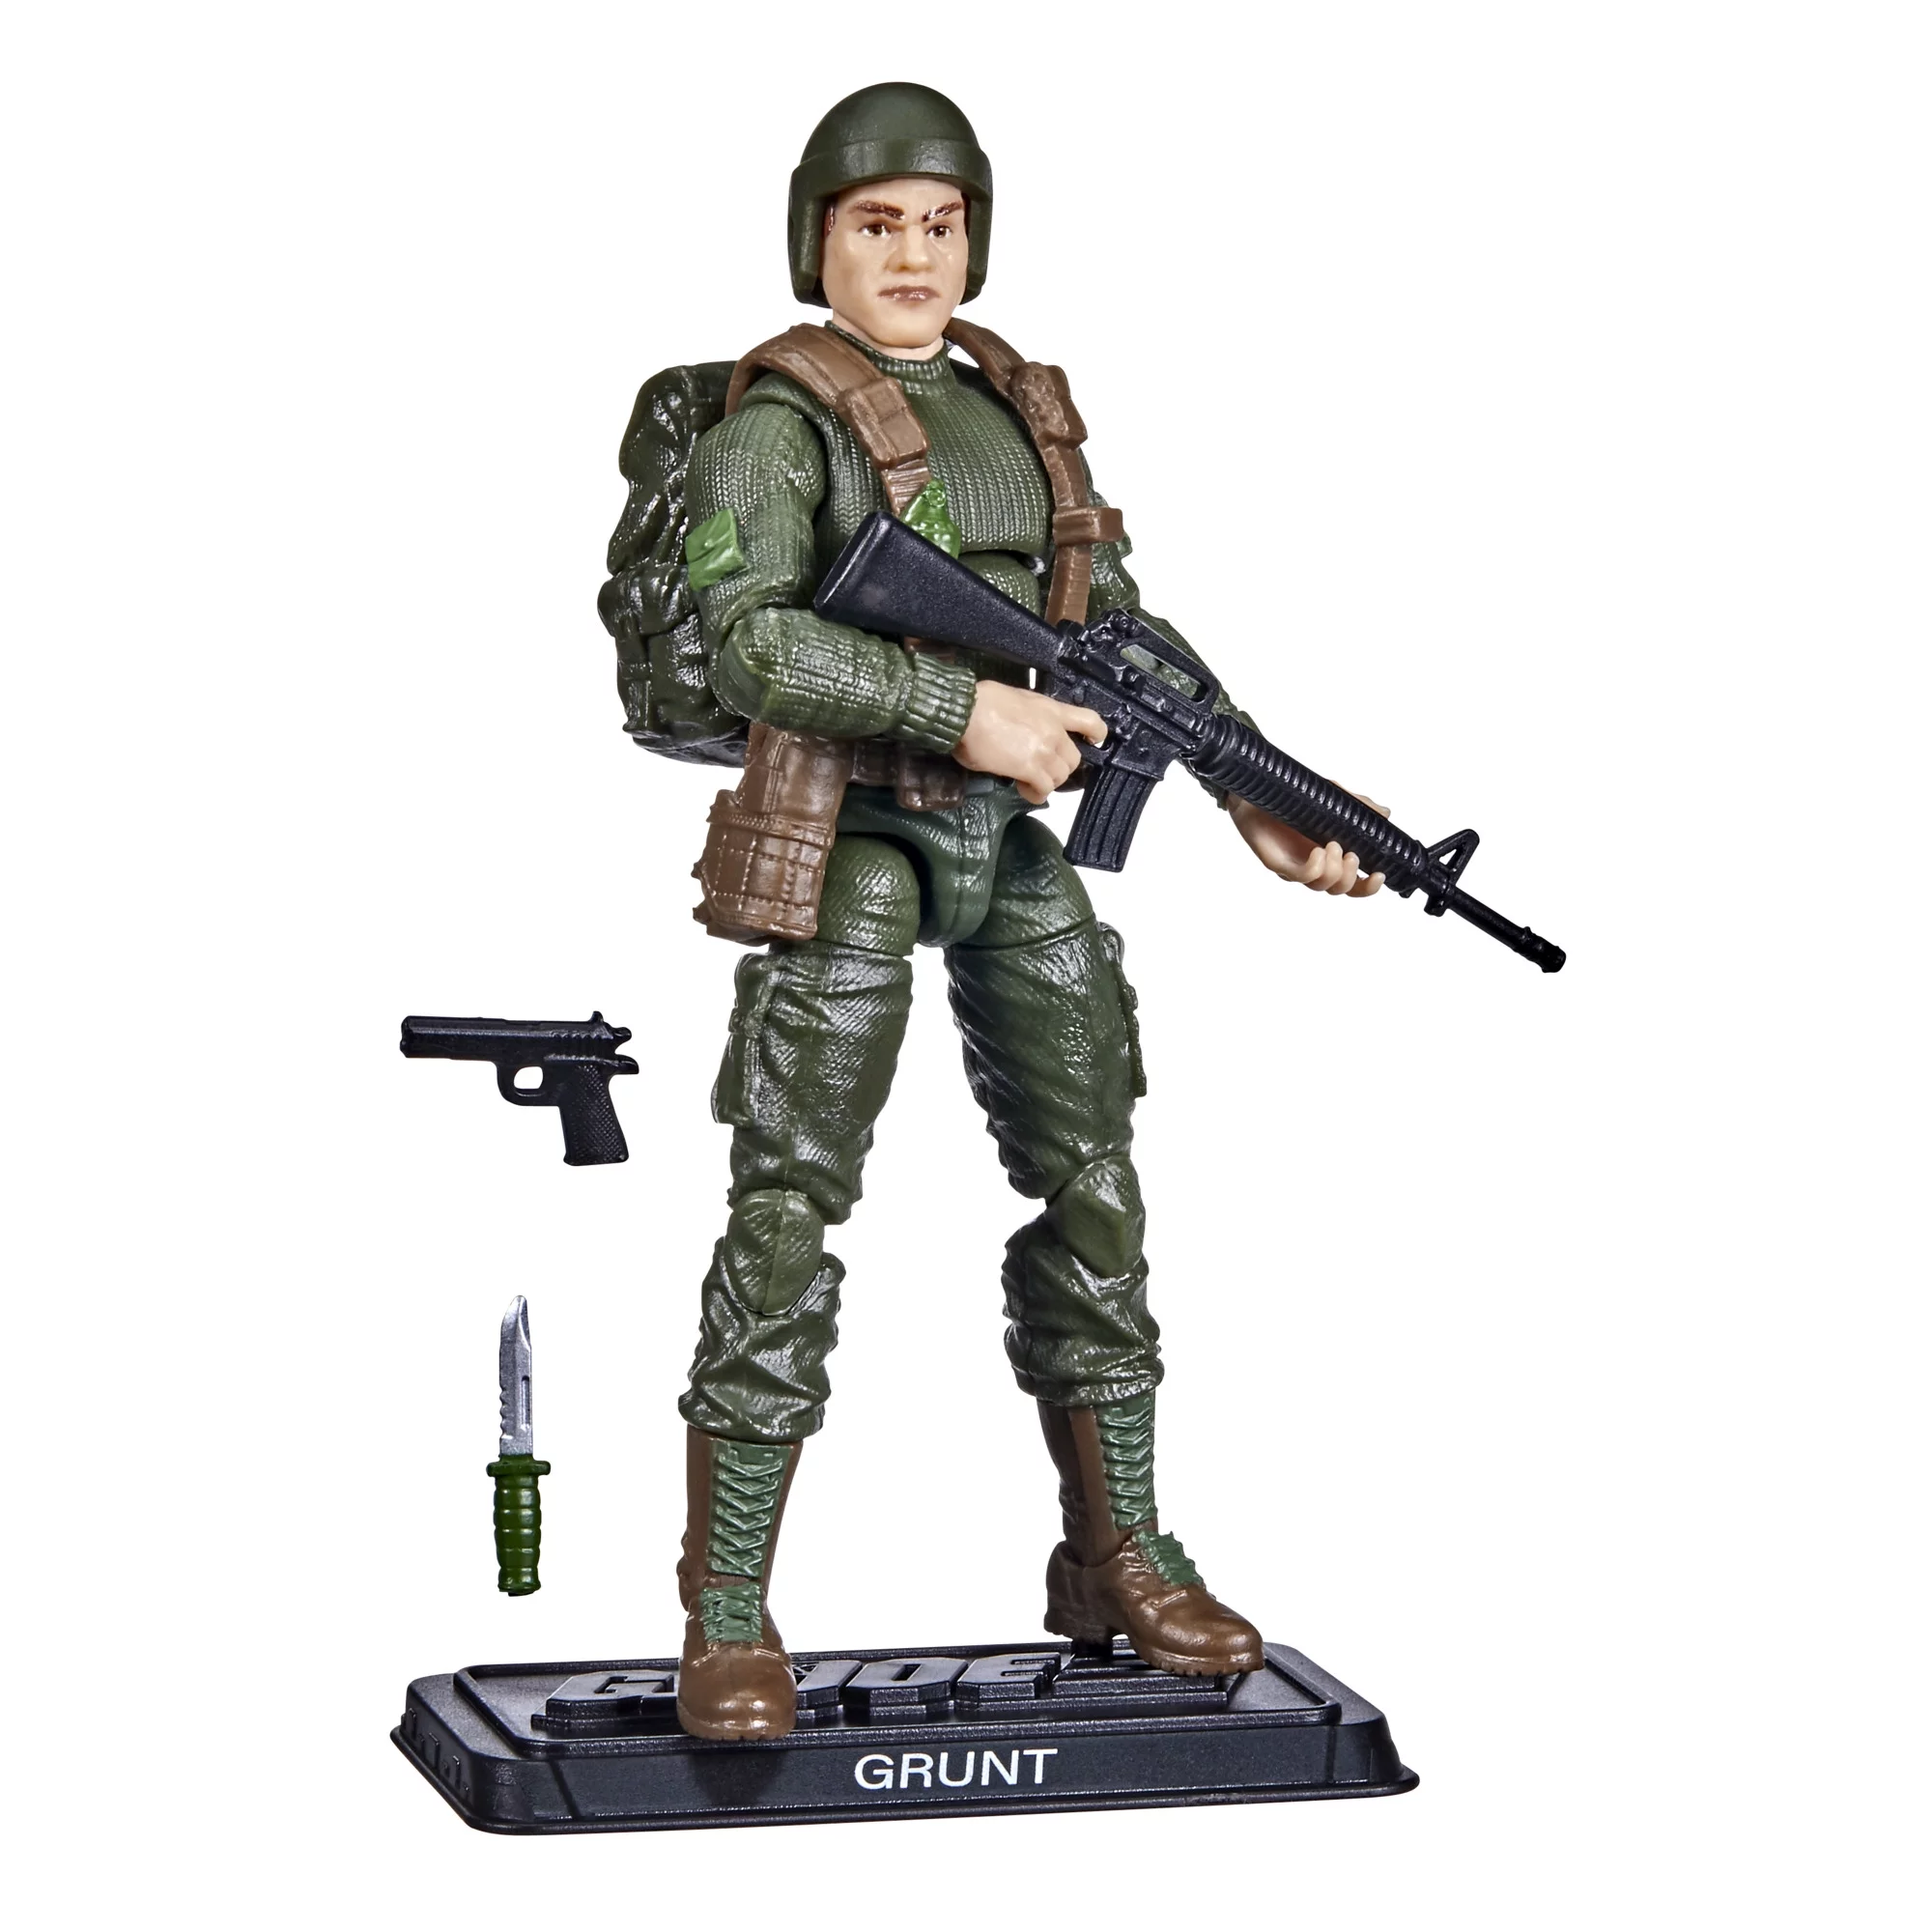 G.I. Joe: Retro Collection Robert “Grunt” Graves Kids Toy Action Figure for Boys and Girls (4”)